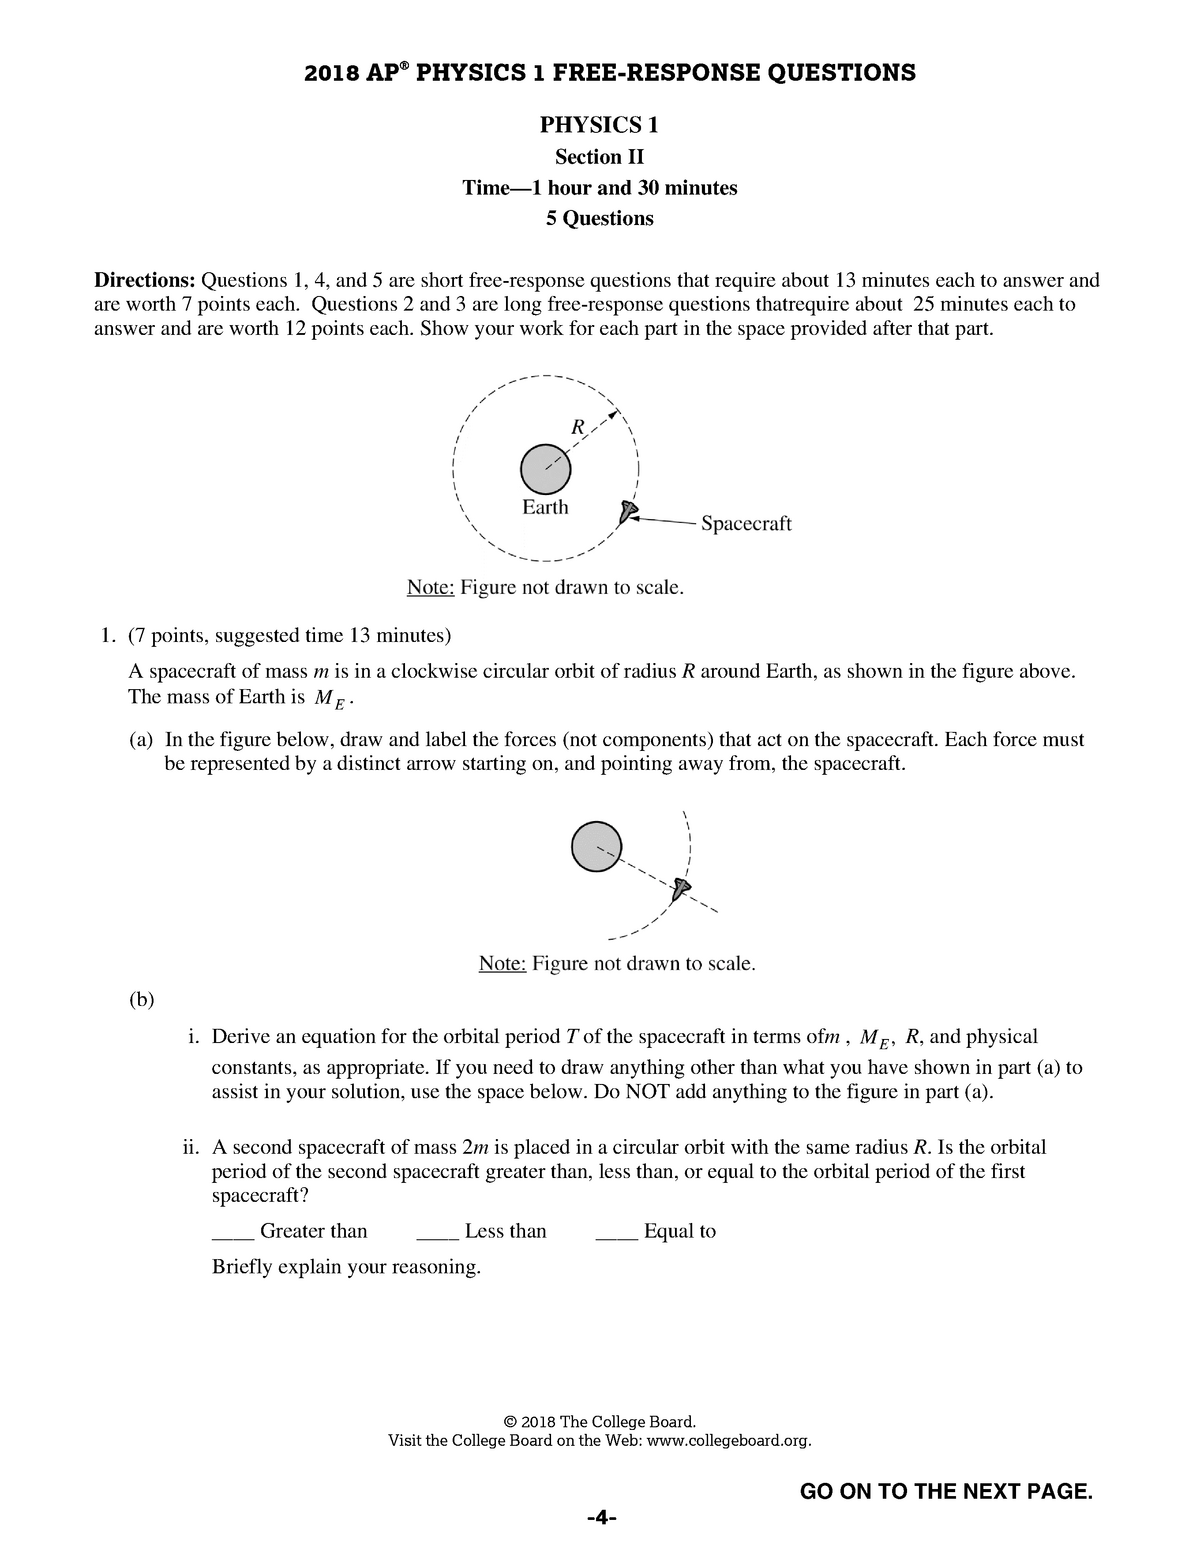 AP Physics 1 2018 FreeResponse Questions PHYSICS 1 Section II Time—1